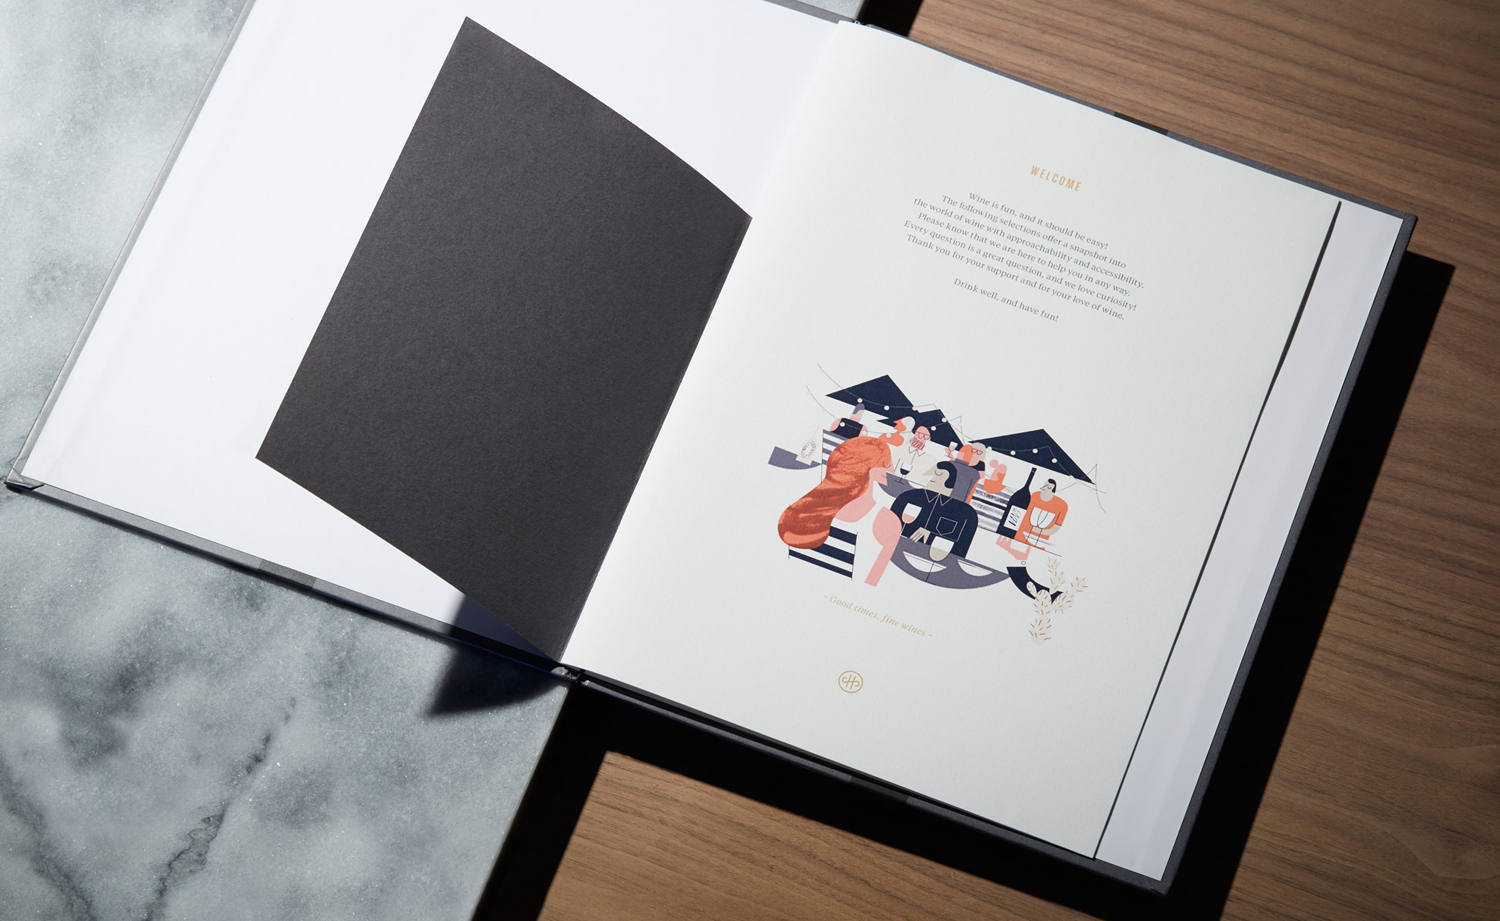 Brand identity and menu designed by Conductor featuring illustration by Tom Froese for High Street Wine Co, a wine bar and shop located in San Antonio's Pearl neighbourhood